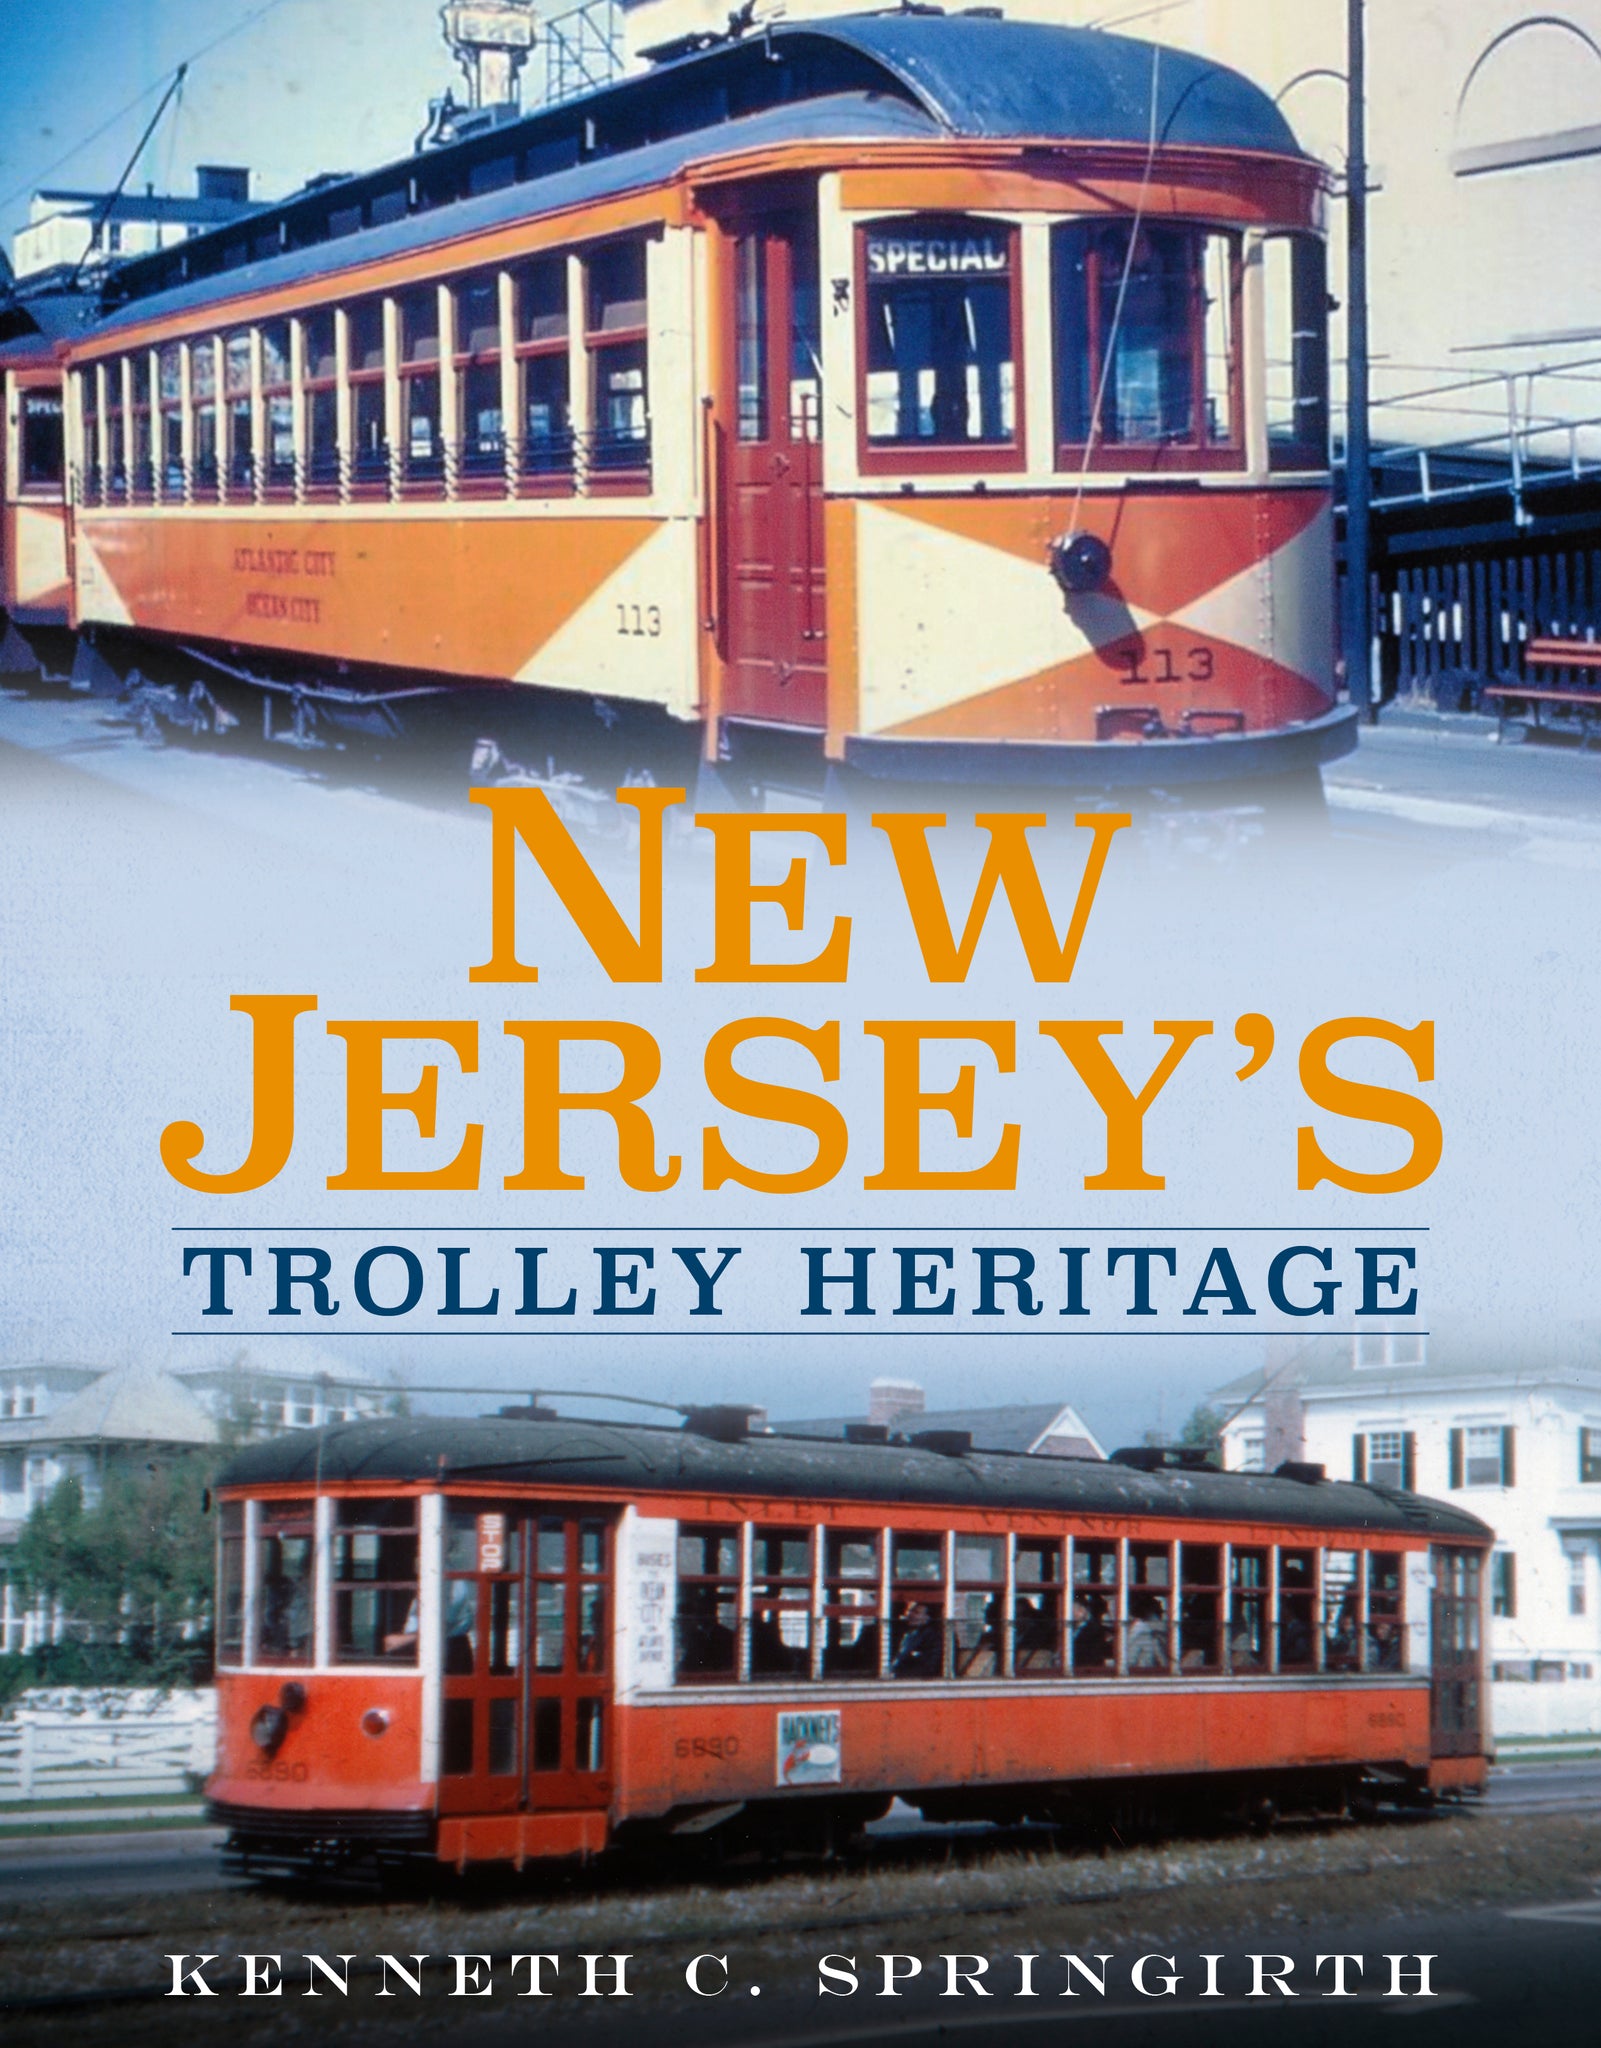 New Jersey’s Trolley Heritage - available now from Fonthill Media